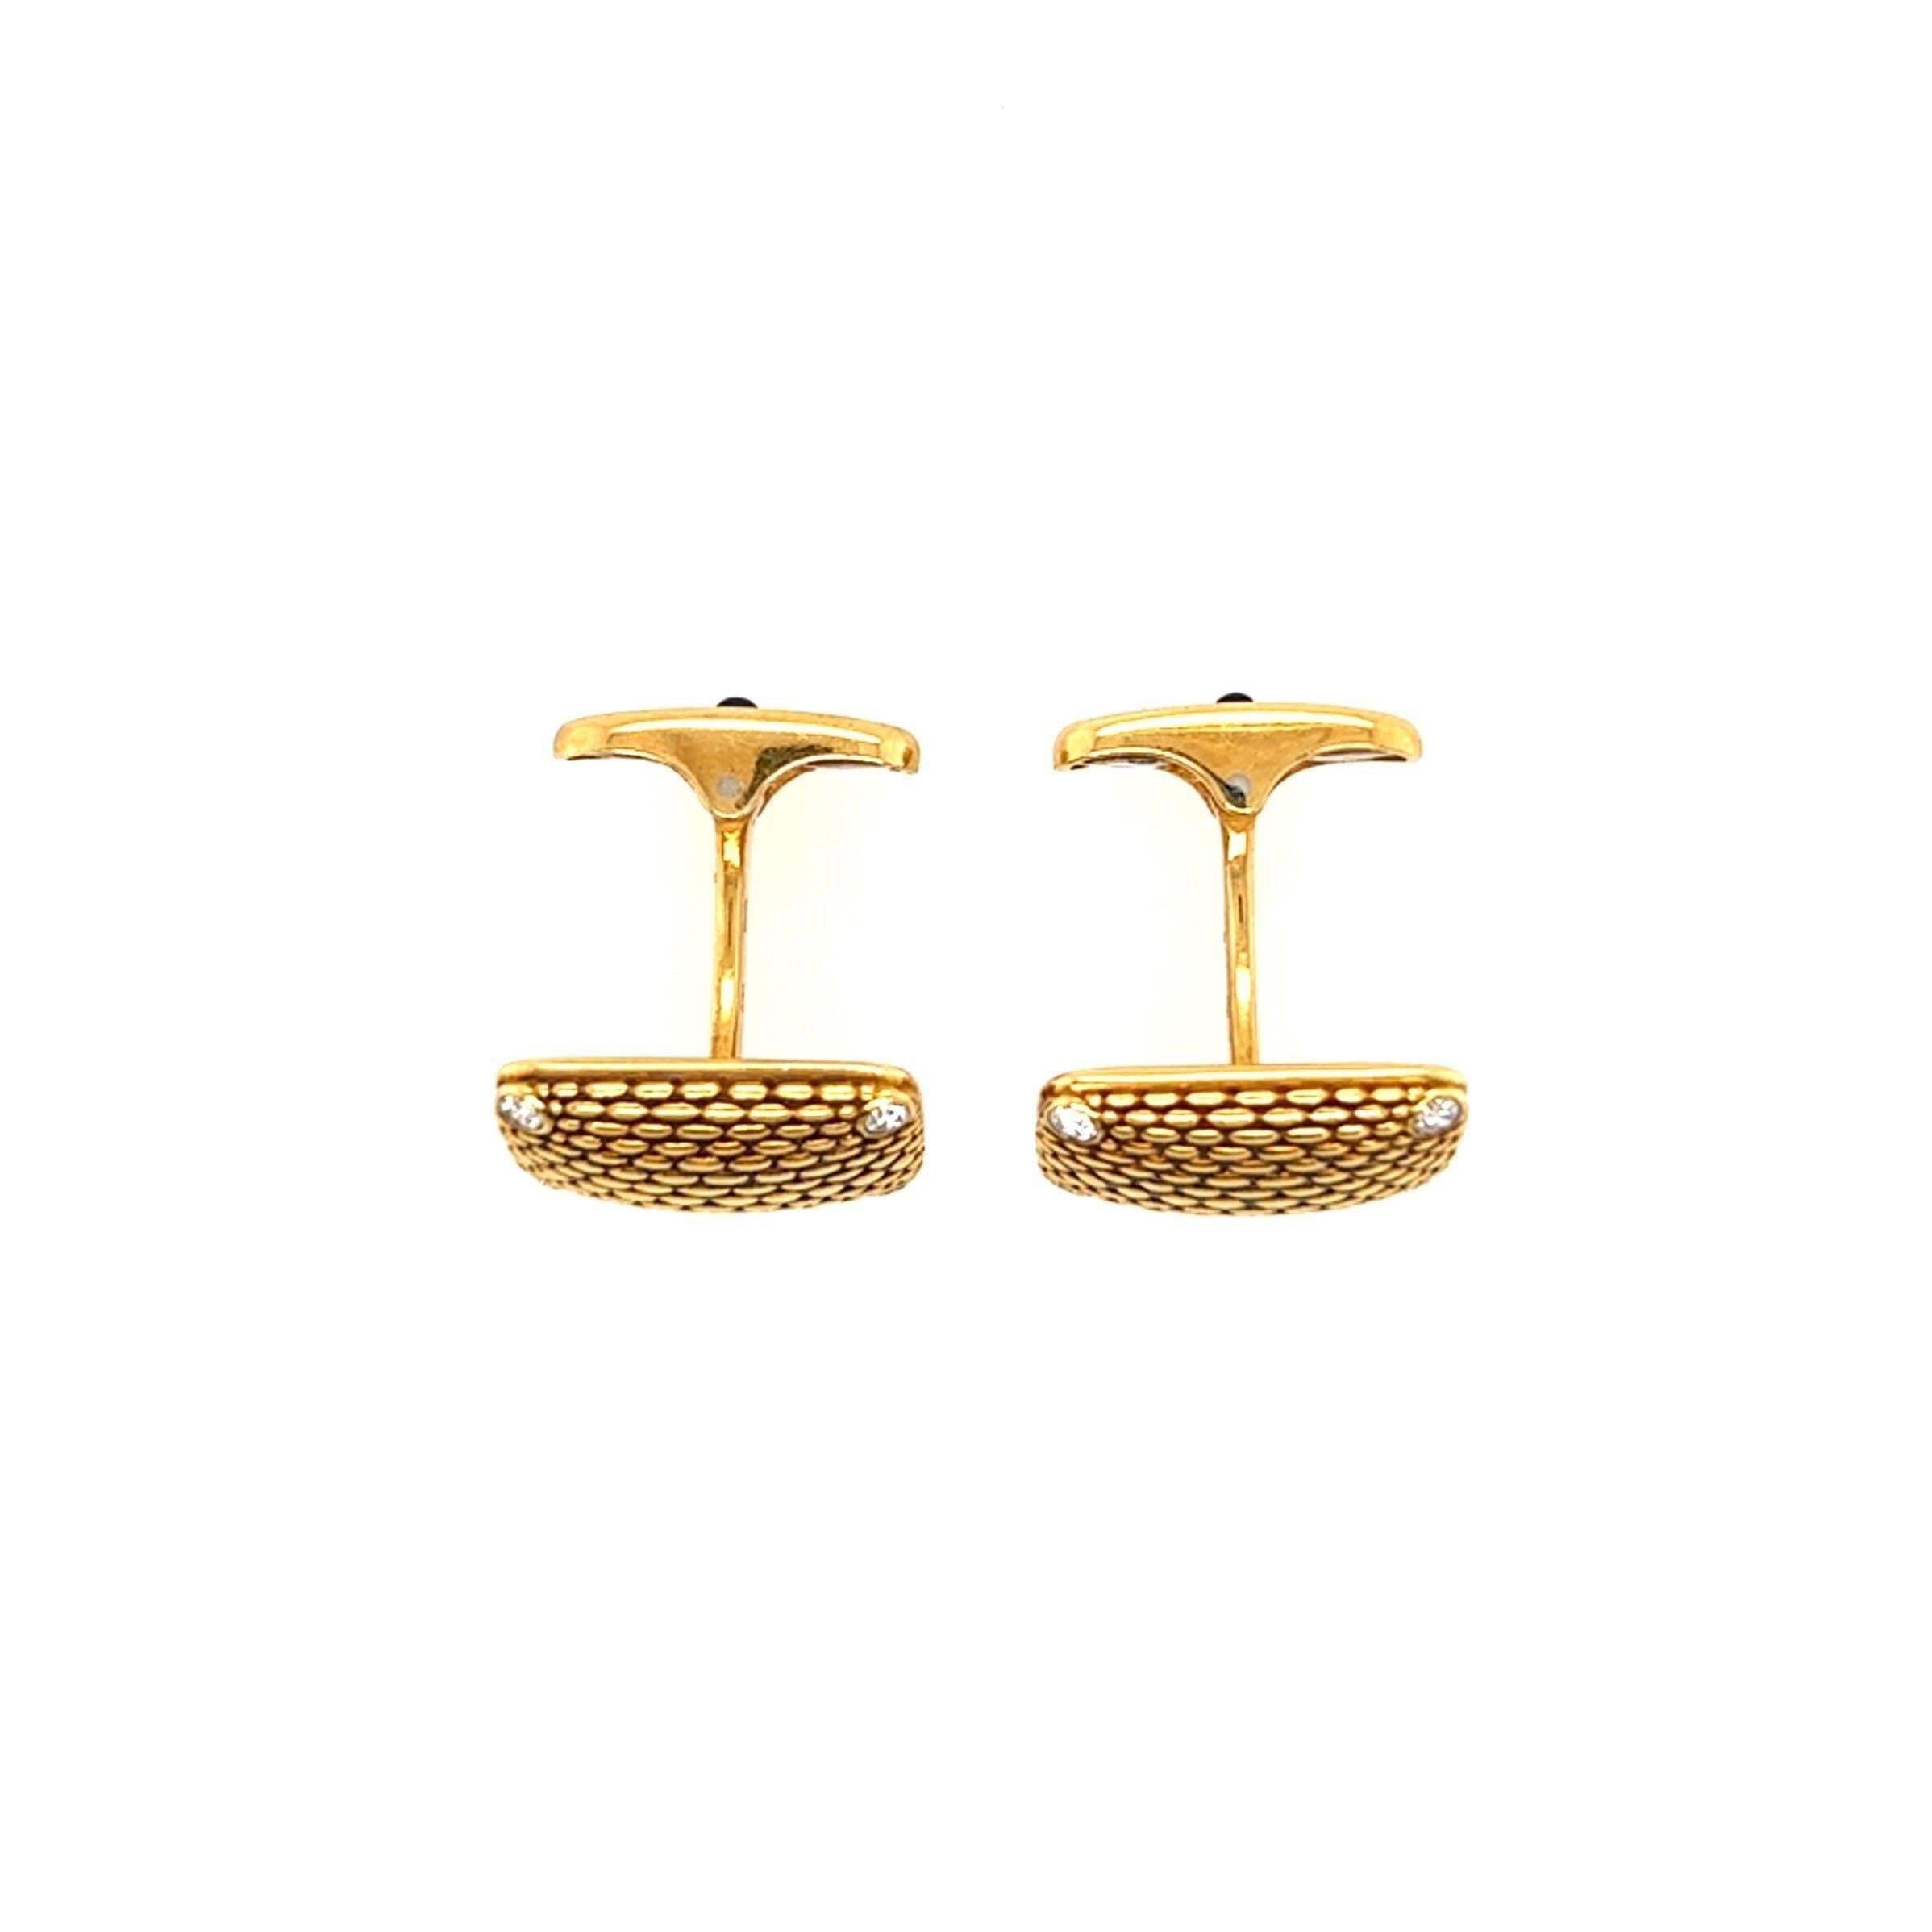 A pair of 18 karat yellow gold, diamond and sapphire cufflinks, Alex Sepkus.  The “Brick Work” cufflinks formed of textured rectangles with a brilliant cut diamond at each corner, each whale back centering a round cabochon sapphire measuring